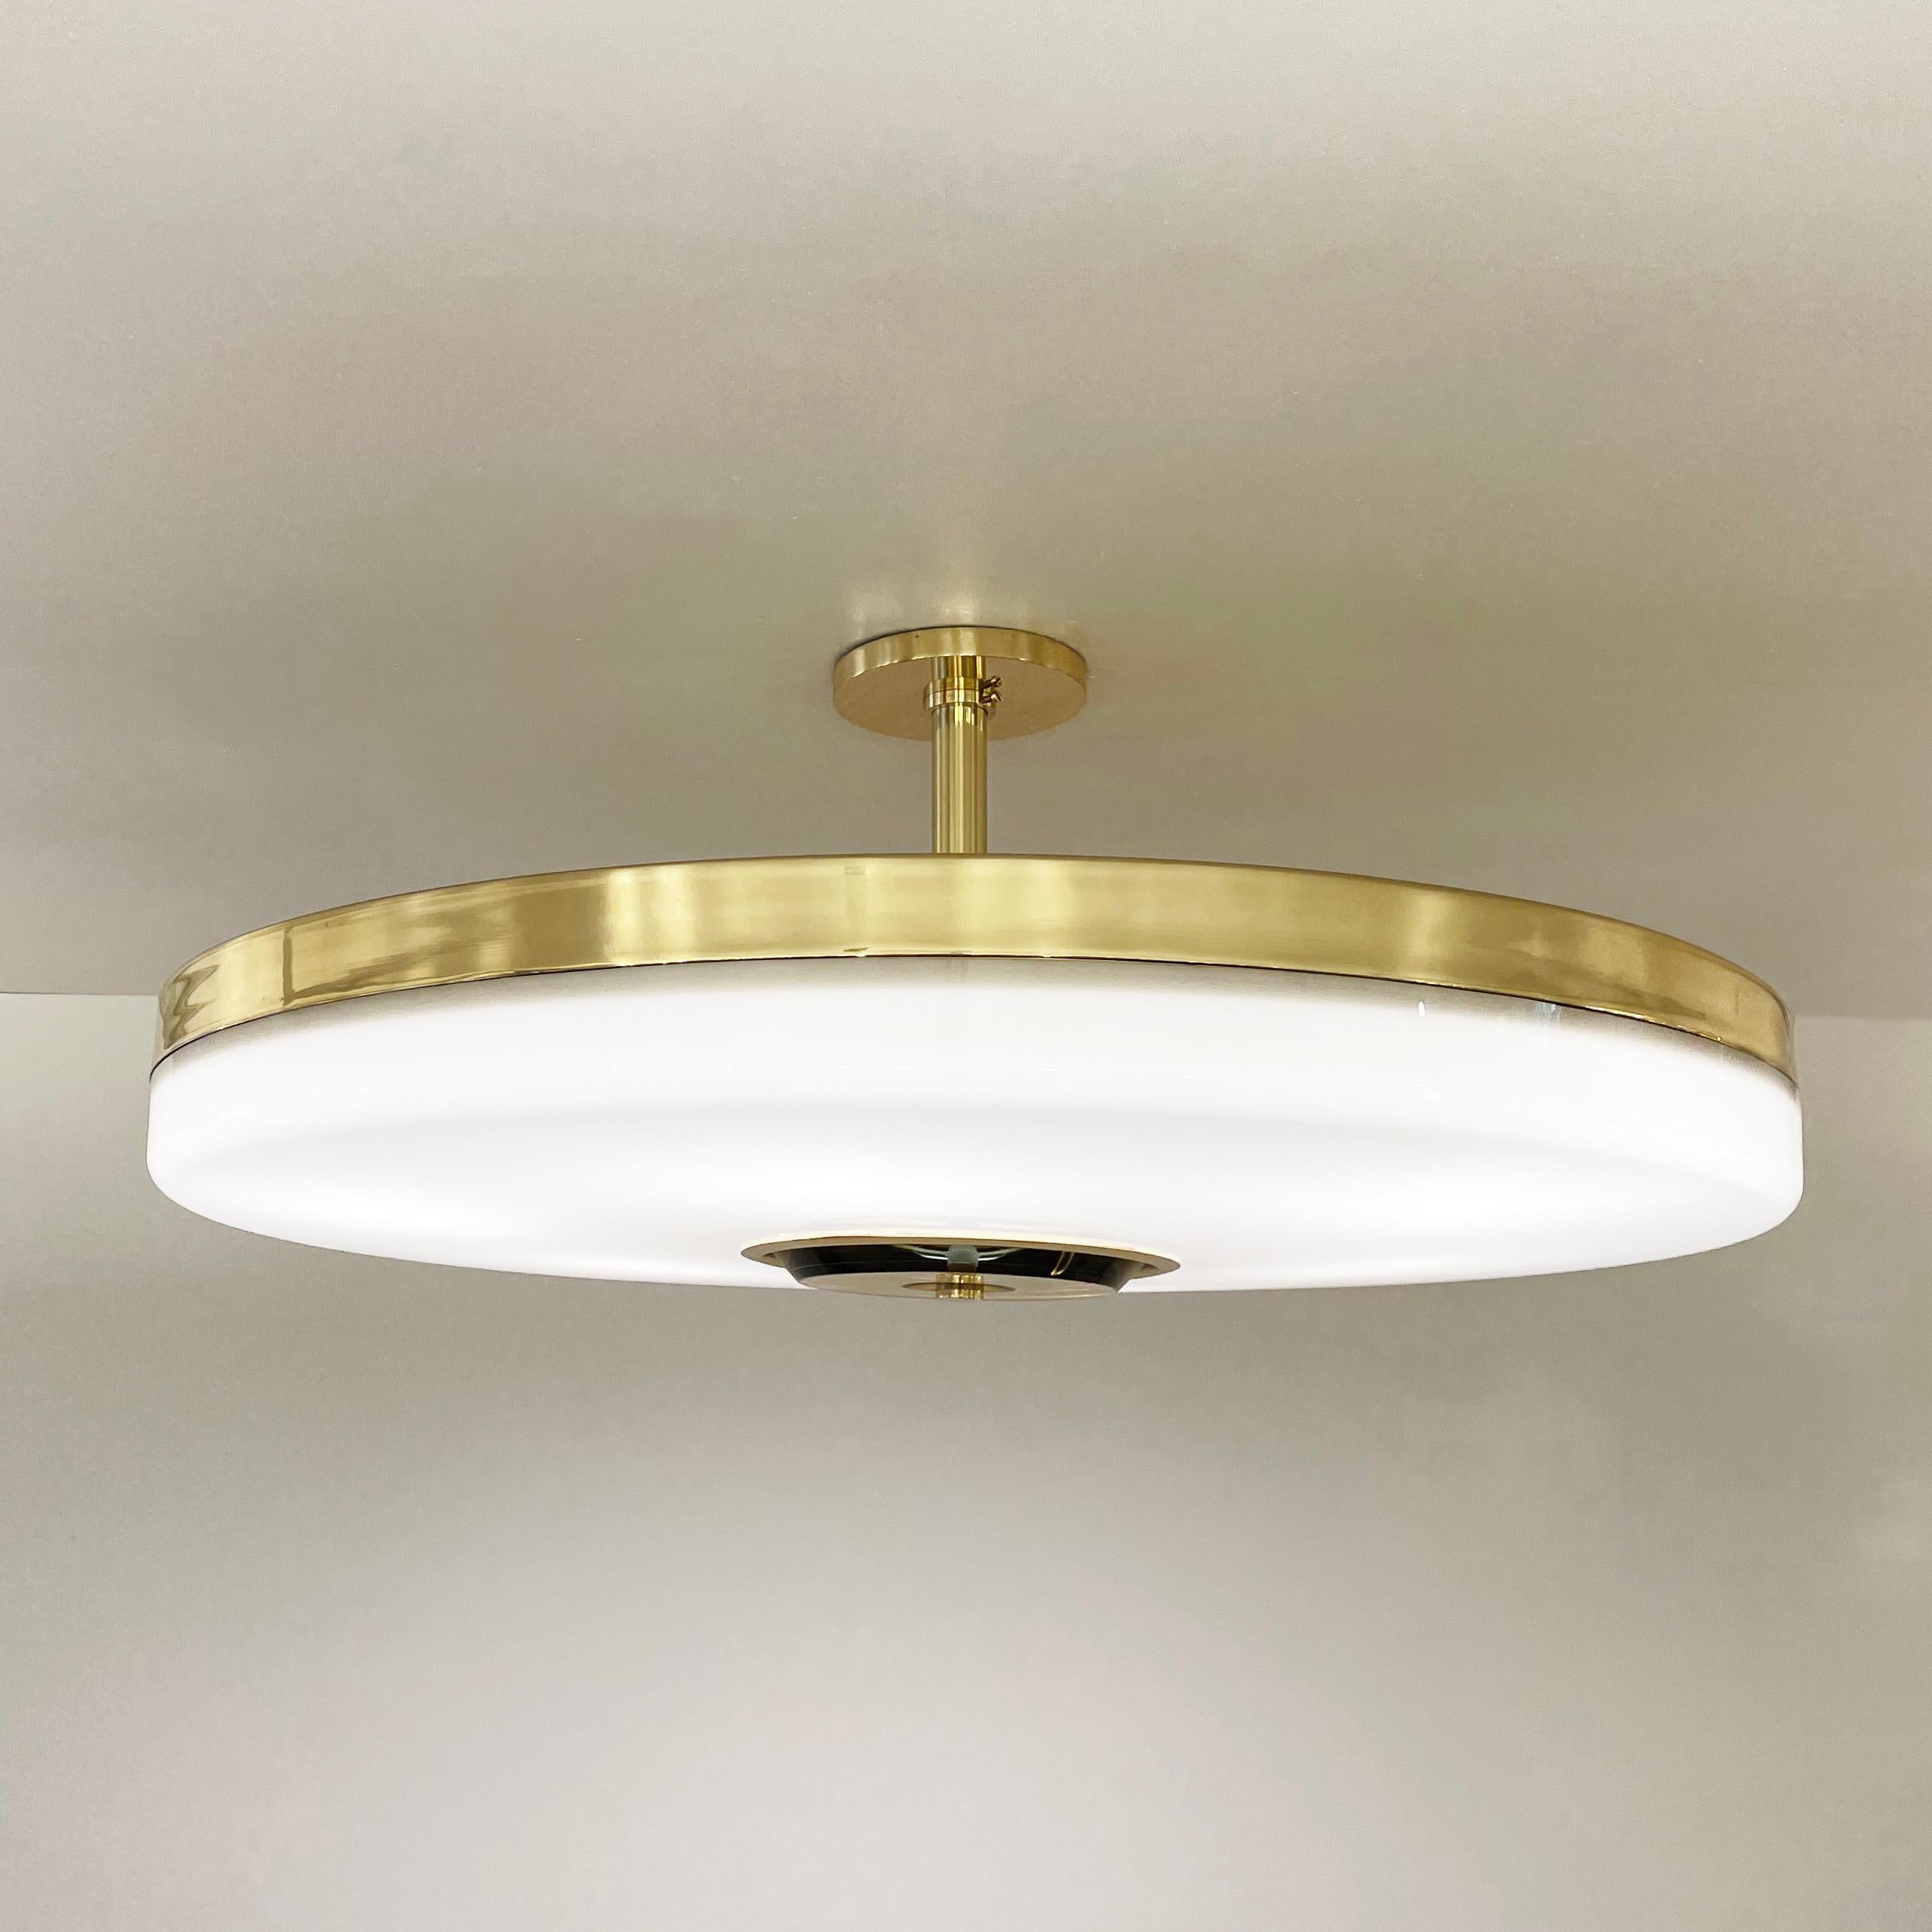 Iris Ceiling Light by Gaspare Asaro-Satin Brass Finish For Sale 2